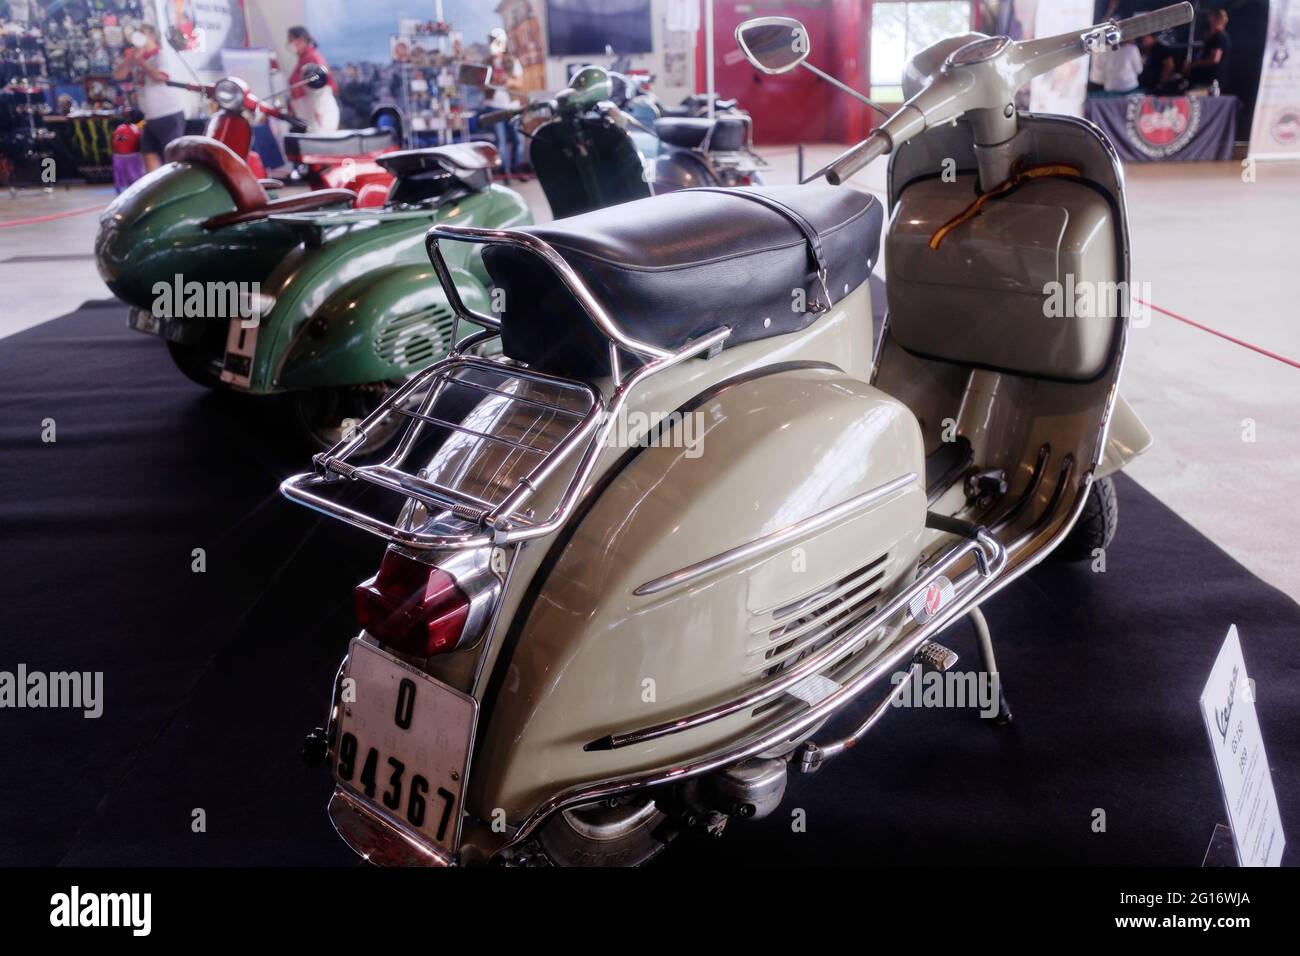 Madrid, Spain. 05th June, 2021. Motorama, Motorcycle Trade Show. 75 years of Vespa motorcycles. Model GS 150, year 1959. Glass Pavilion - Casa de Campo Fairgrounds, Madrid, Spain. Credit: EnriquePSans/Alamy Live News Stock Photo